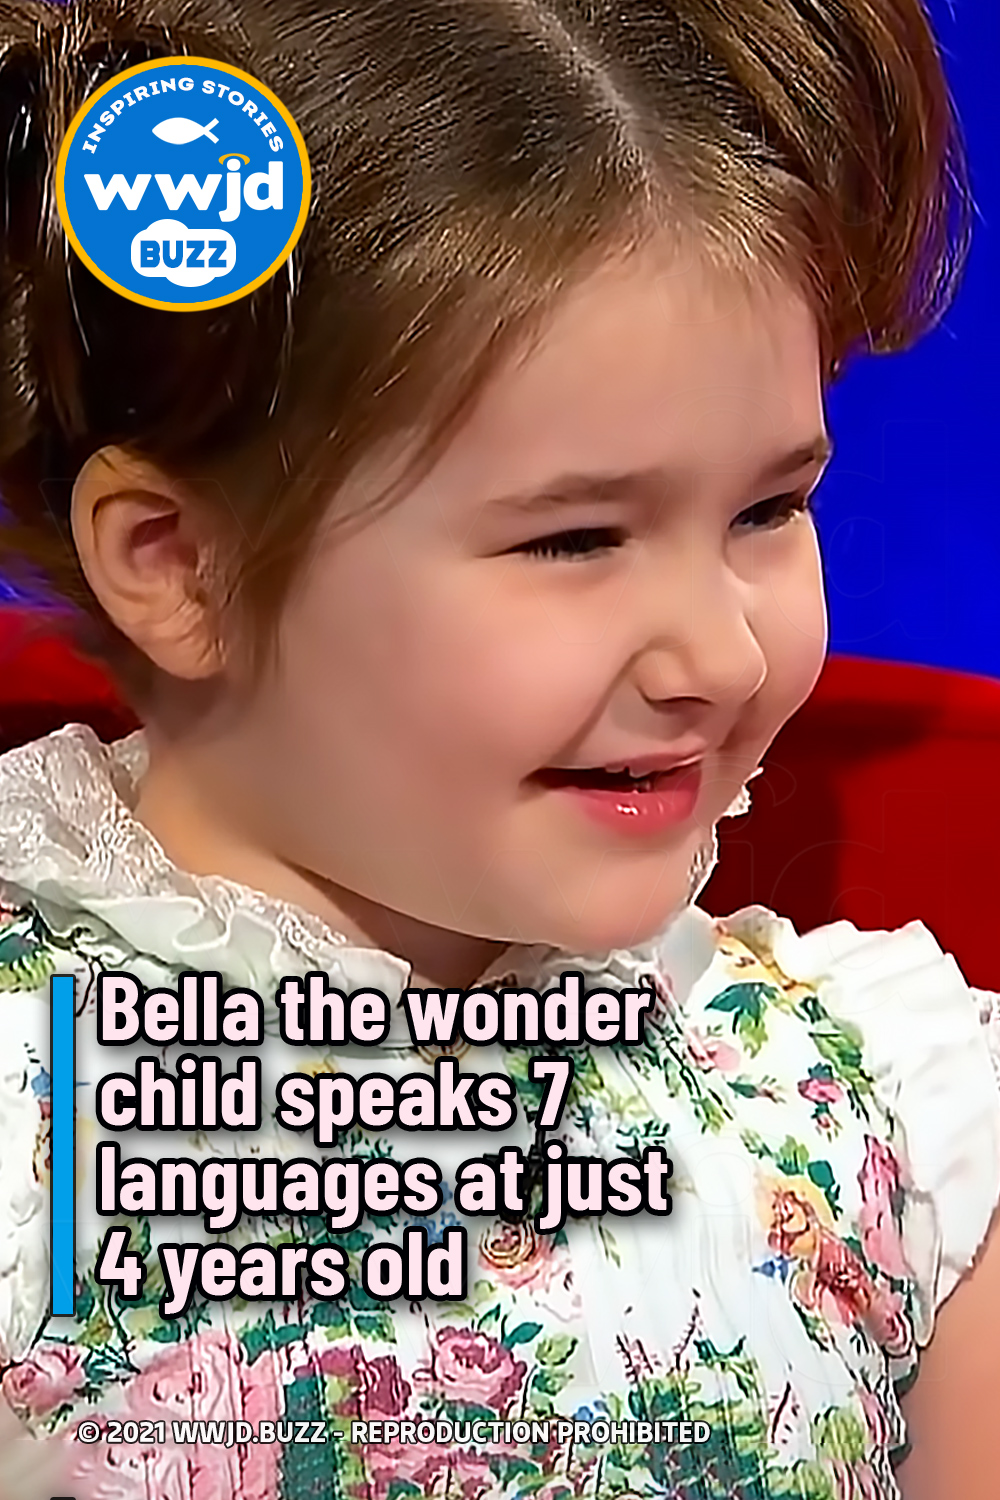 Bella the wonder child speaks 7 languages at just 4 years old